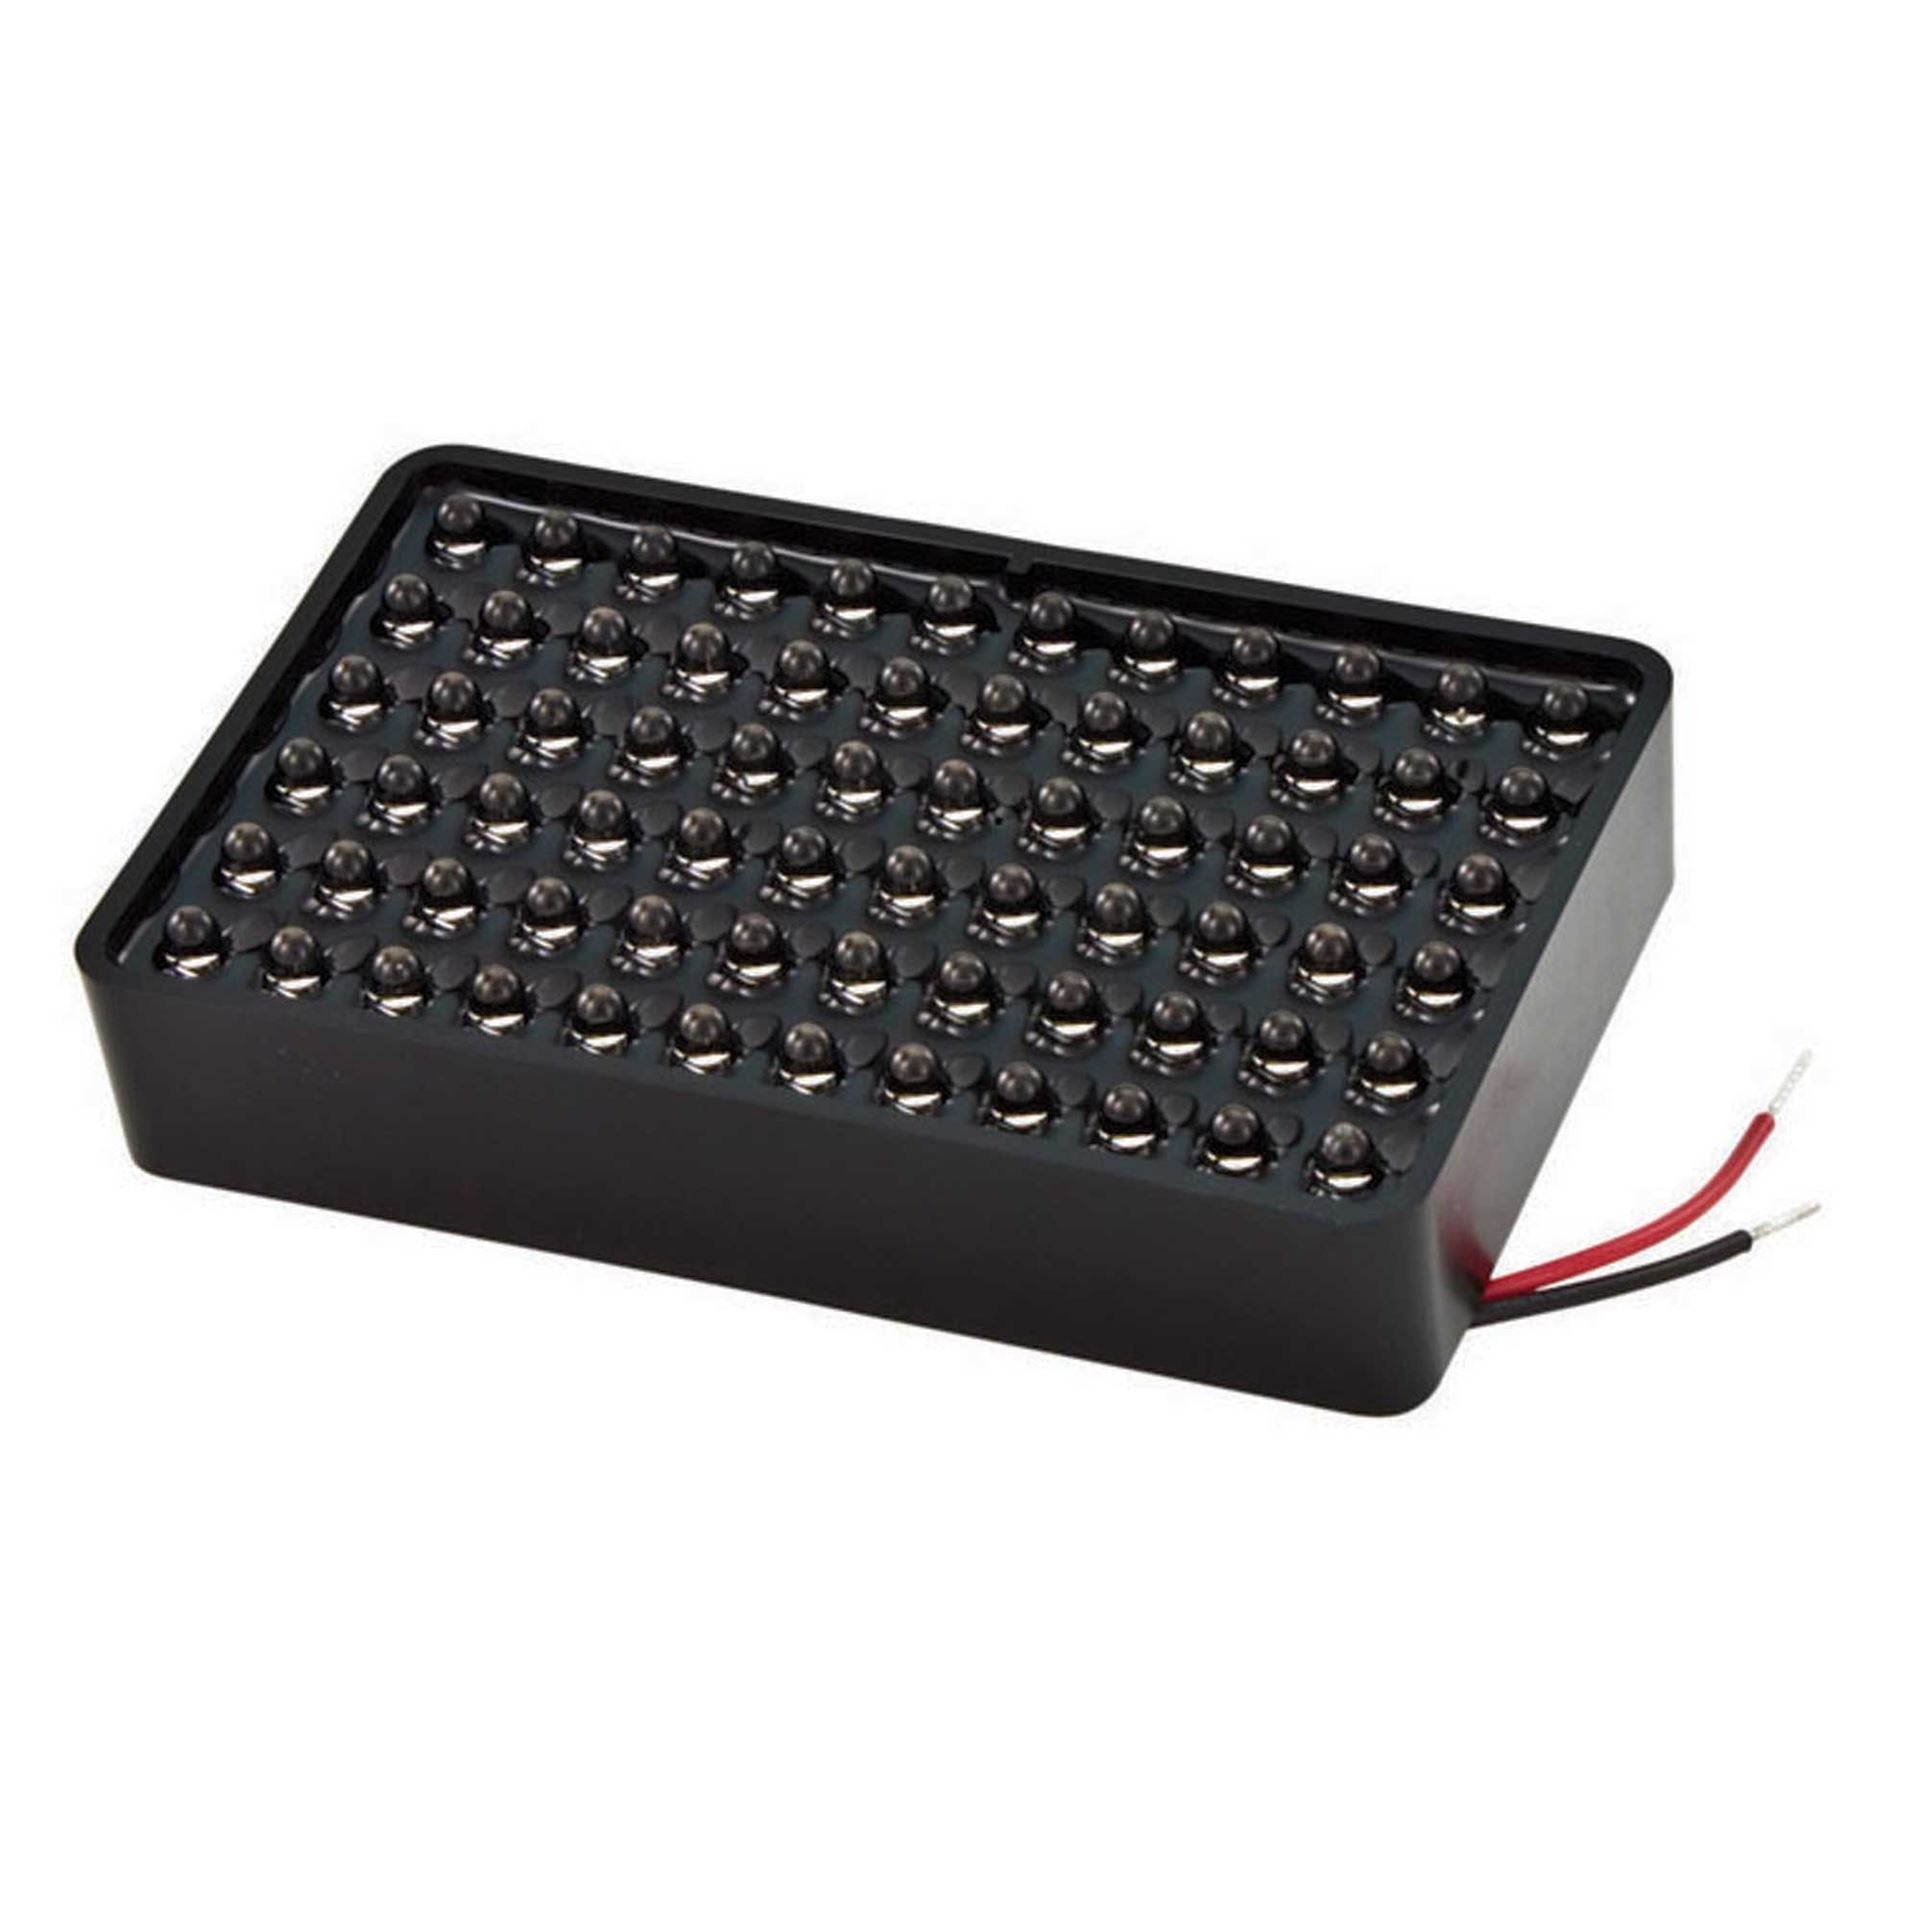 These rectangular rain lights feature 72 bright red LEDs and are mounted via M5 male threads on the back of the unit.  FIA & Motorsport Australia approved  Dimensions - 65 x 105 x 19mm Autoport